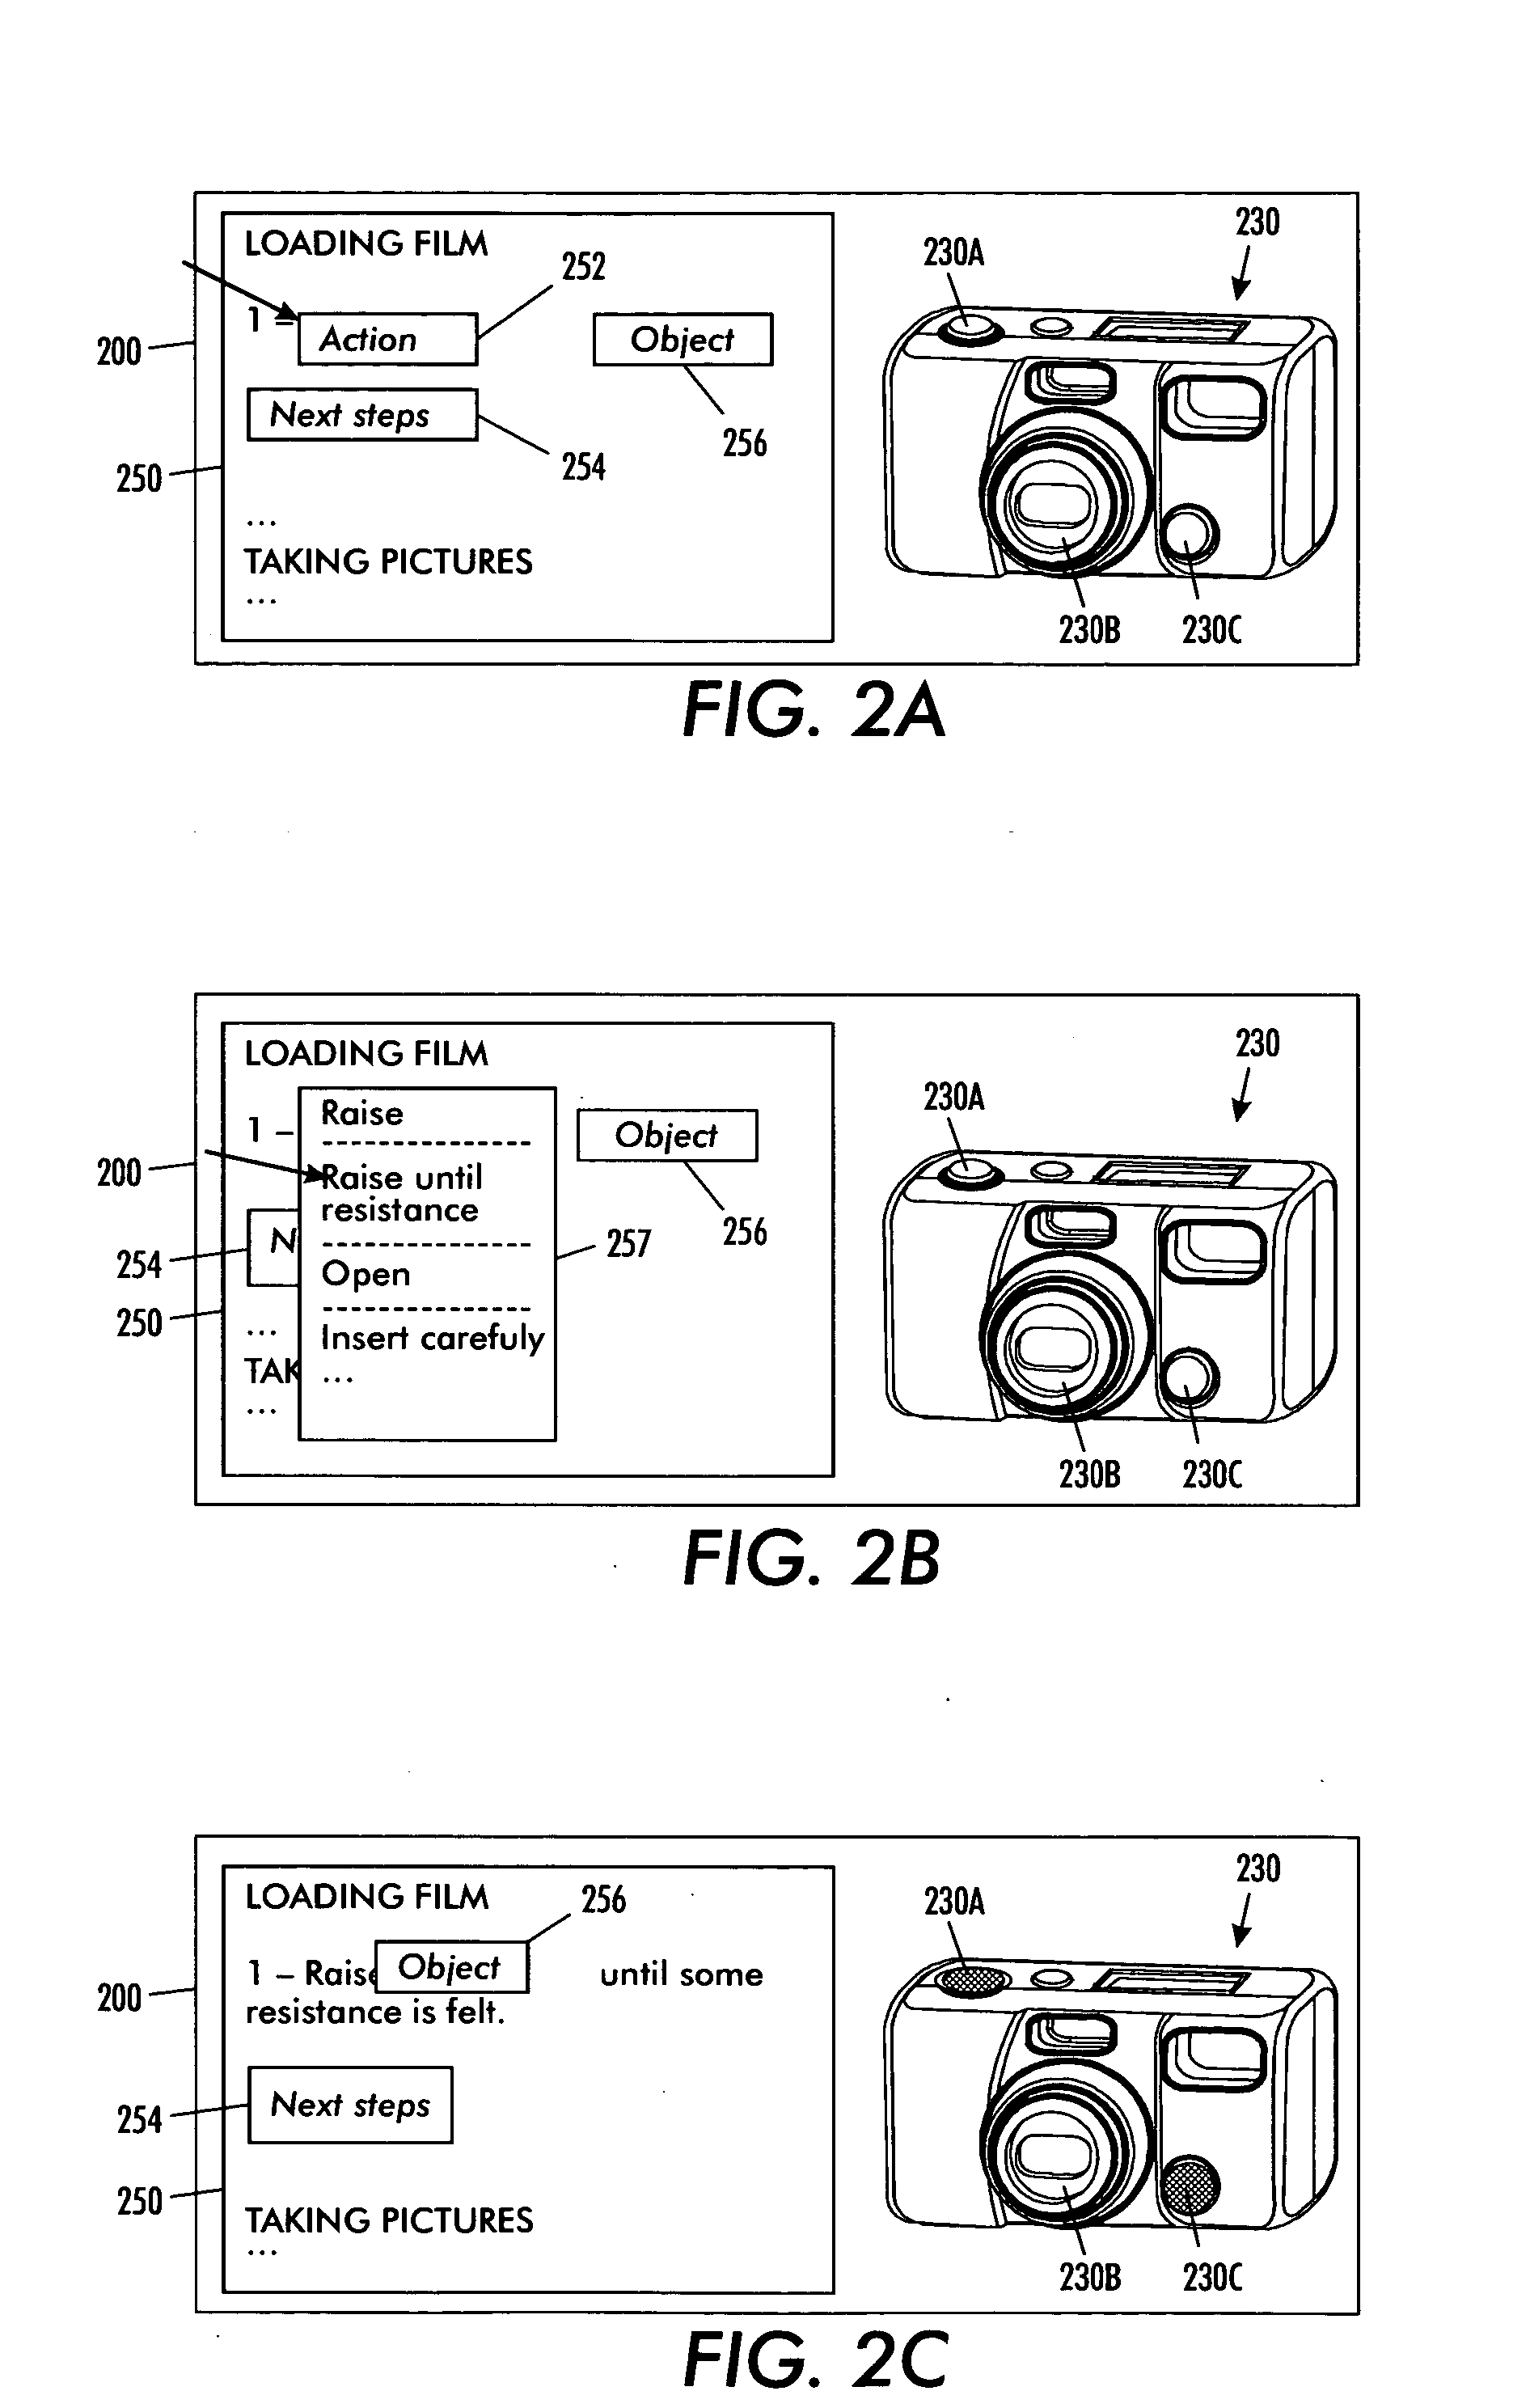 Method and apparatus for authoring documents using object-based elements as an interaction interface